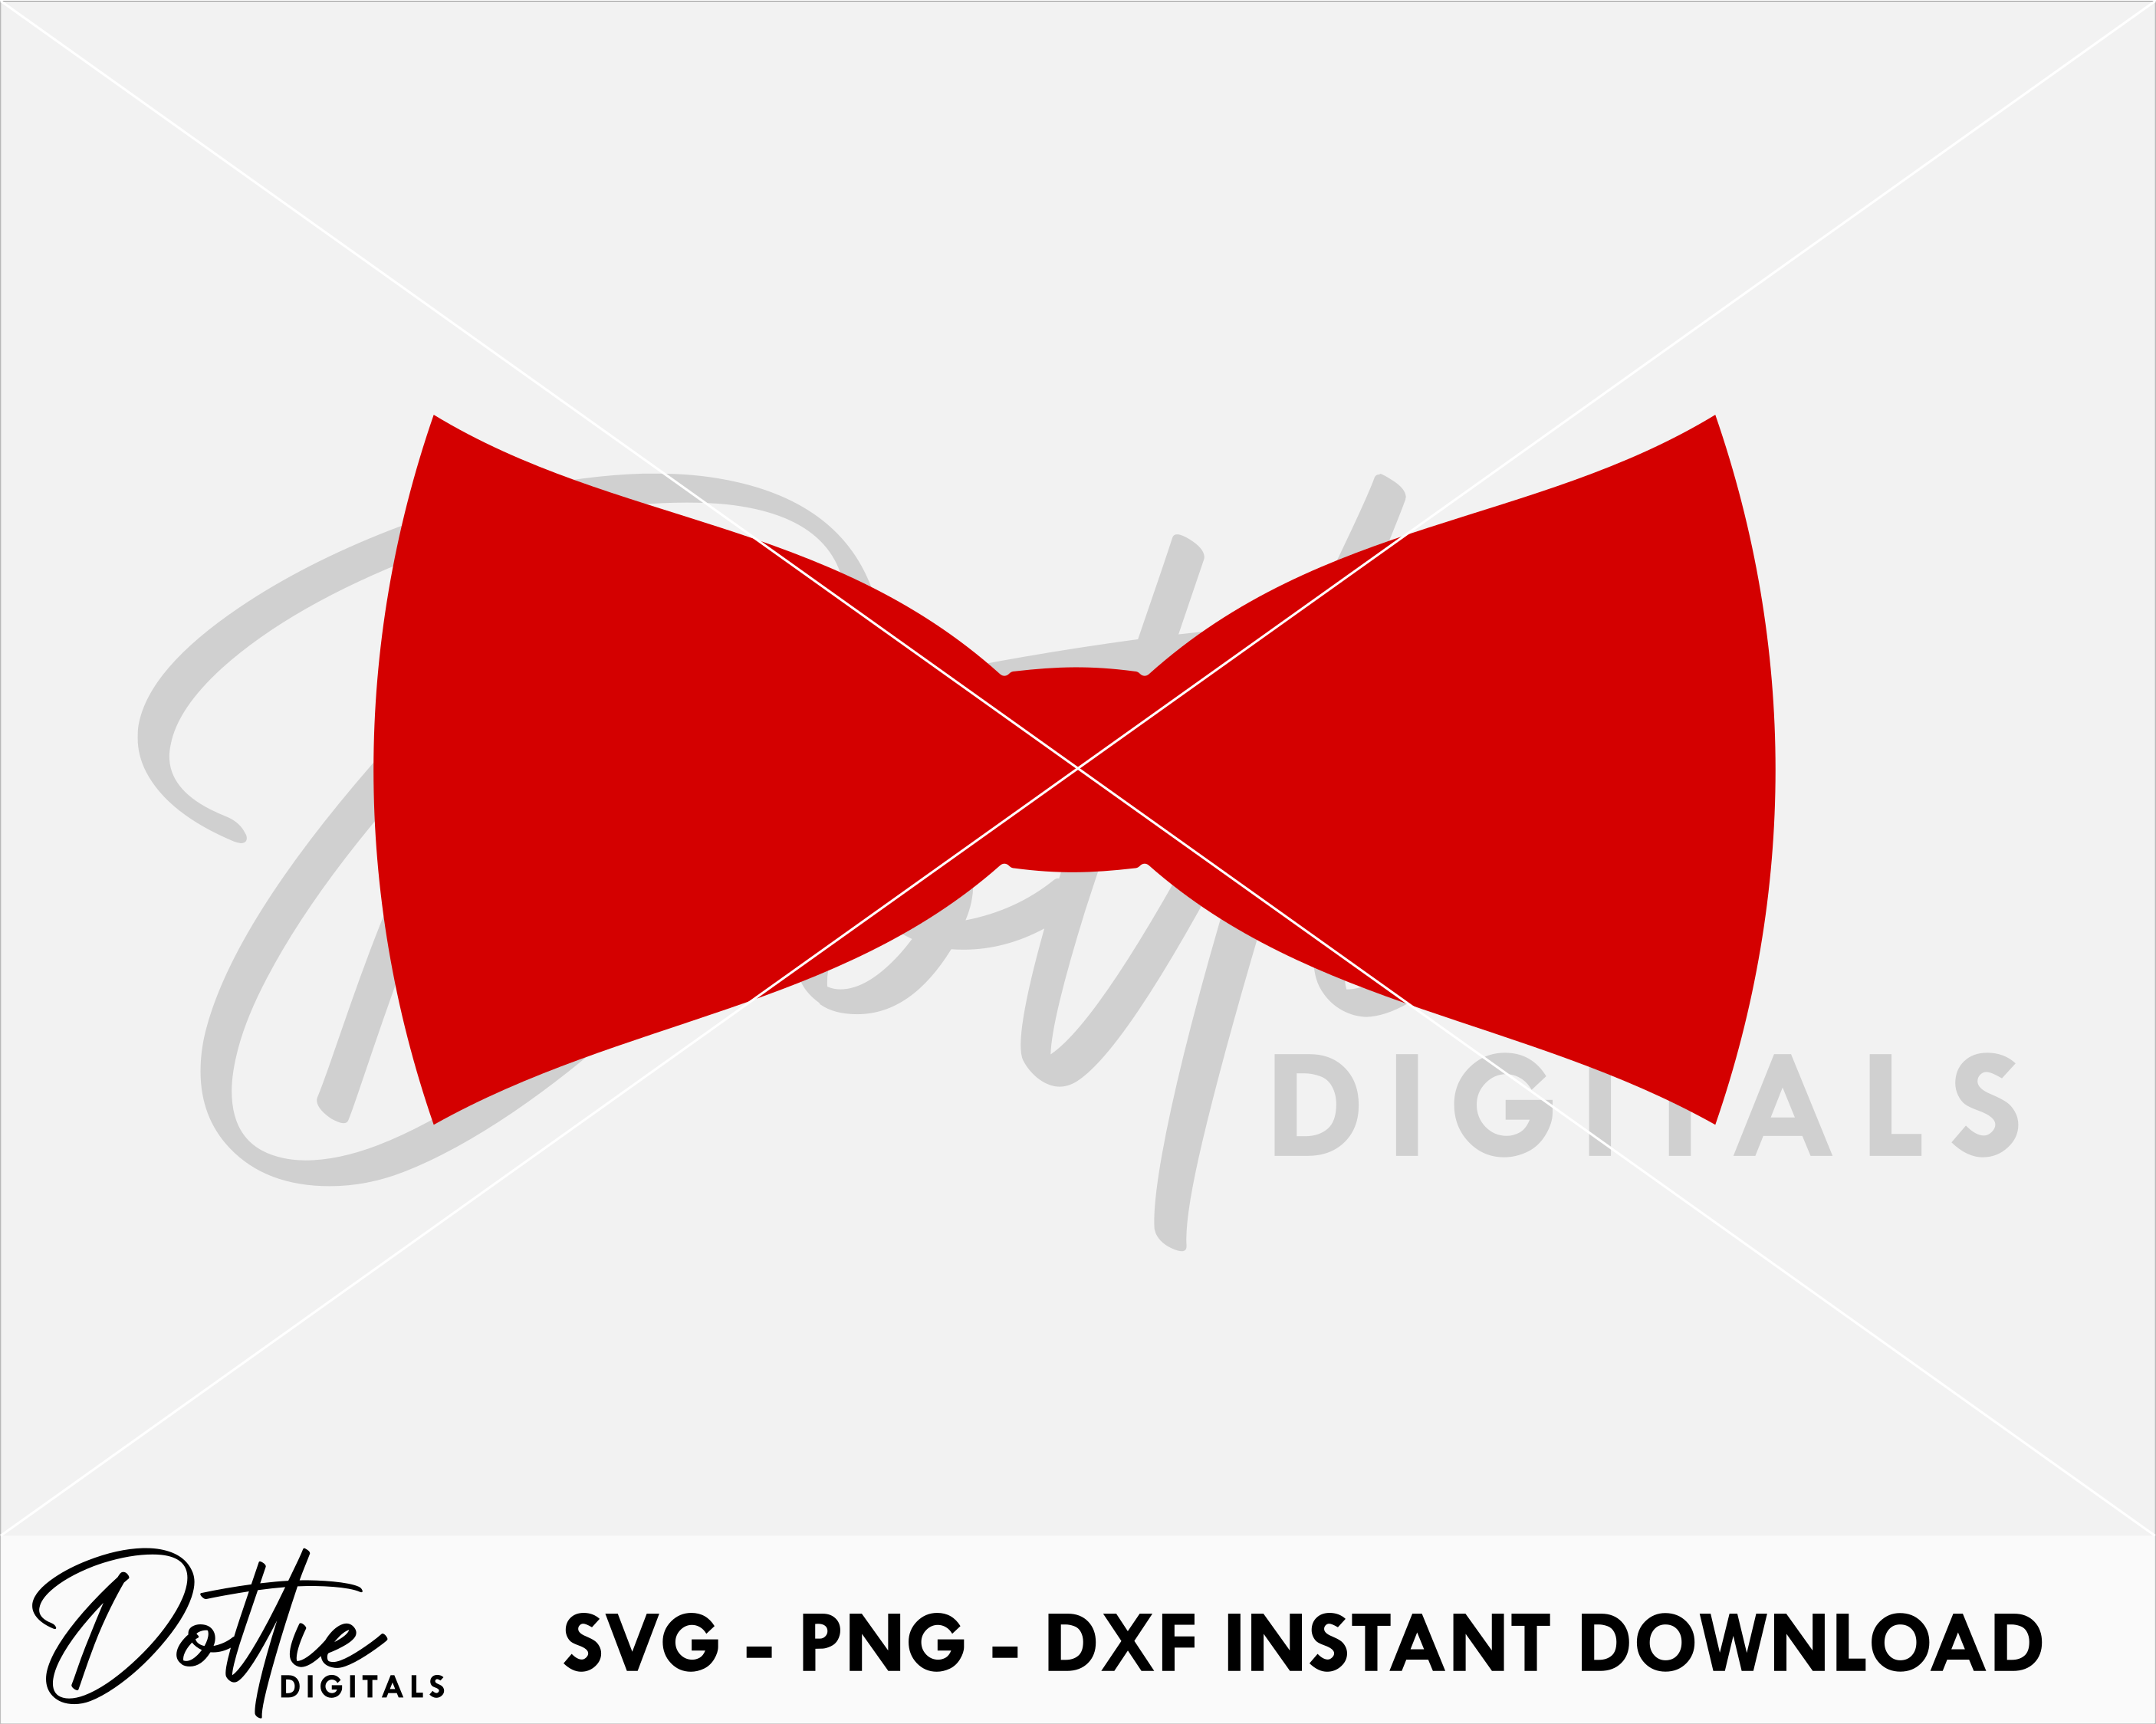 Dottie Digitals - Bow Tie SVG PNG DXF Hair Bow Ribbon Cheer Bow